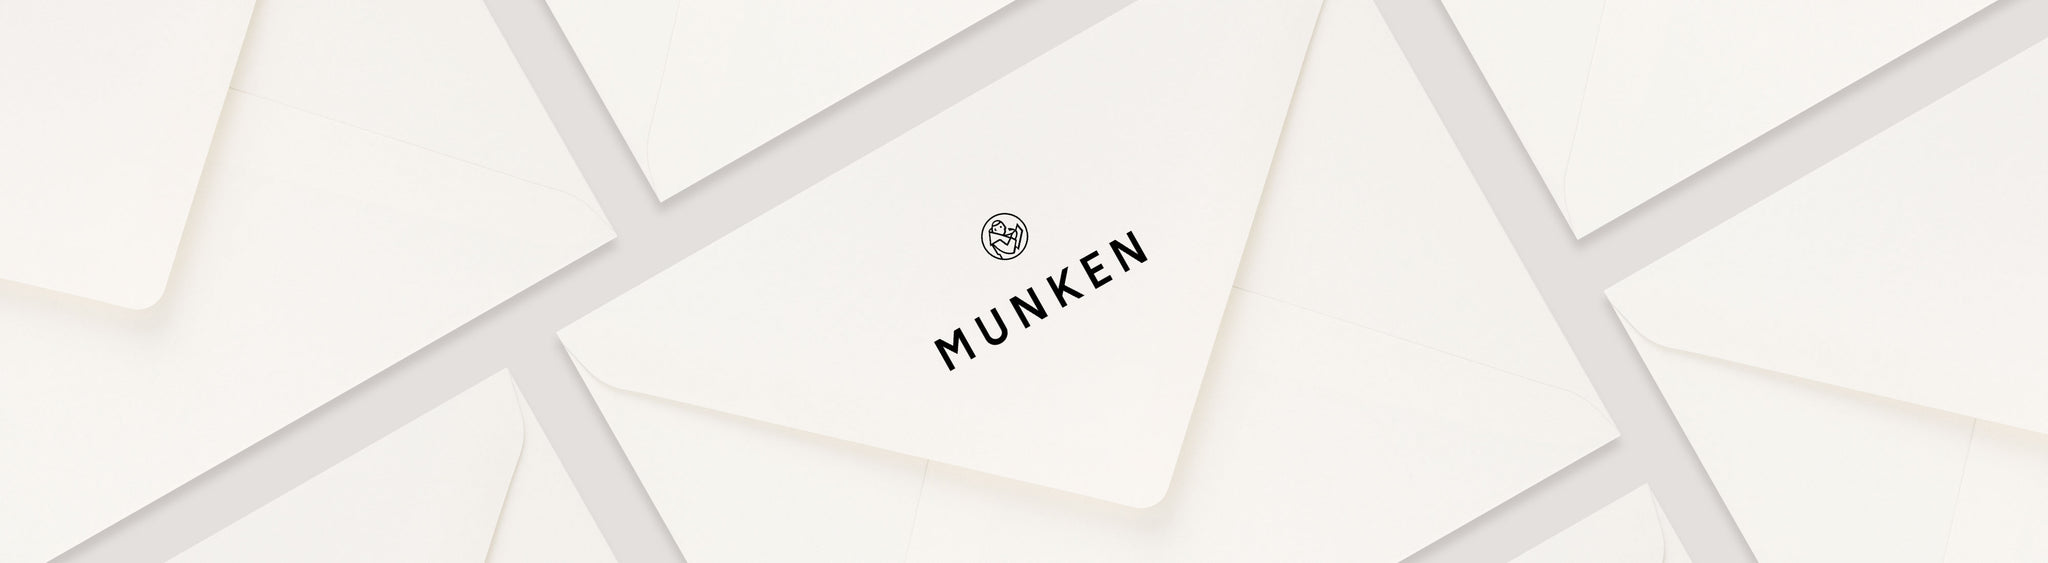 We use Munken, a premium uncoated fine paper for our entire stationery collection